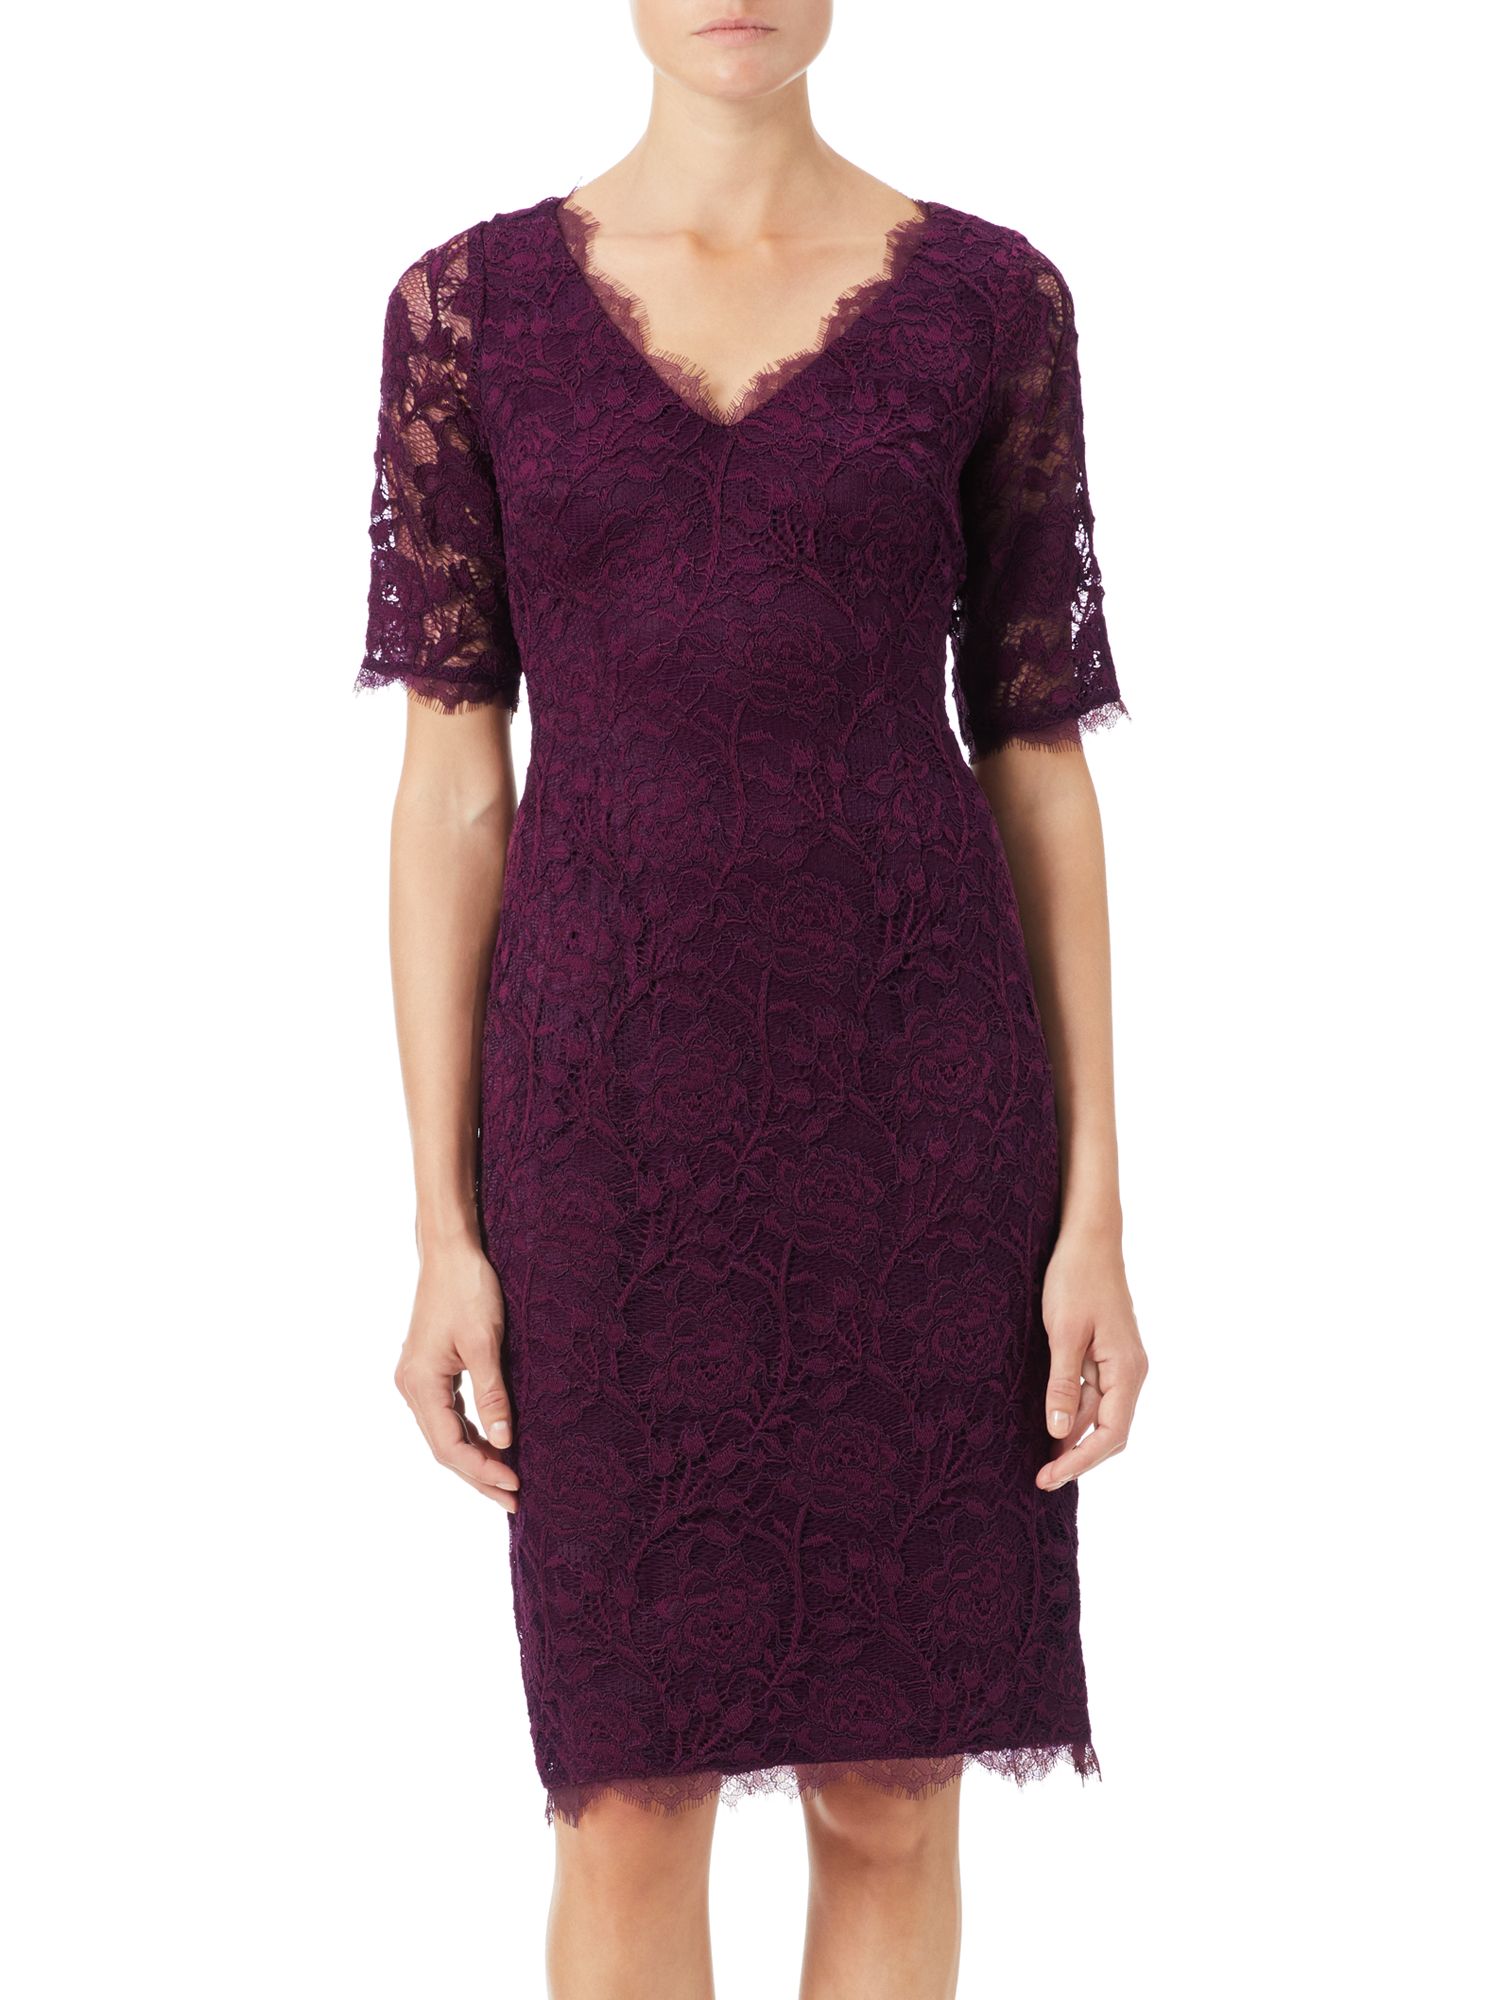 Adrianna Papell Rose Lace Sheath Dress, Mulberry